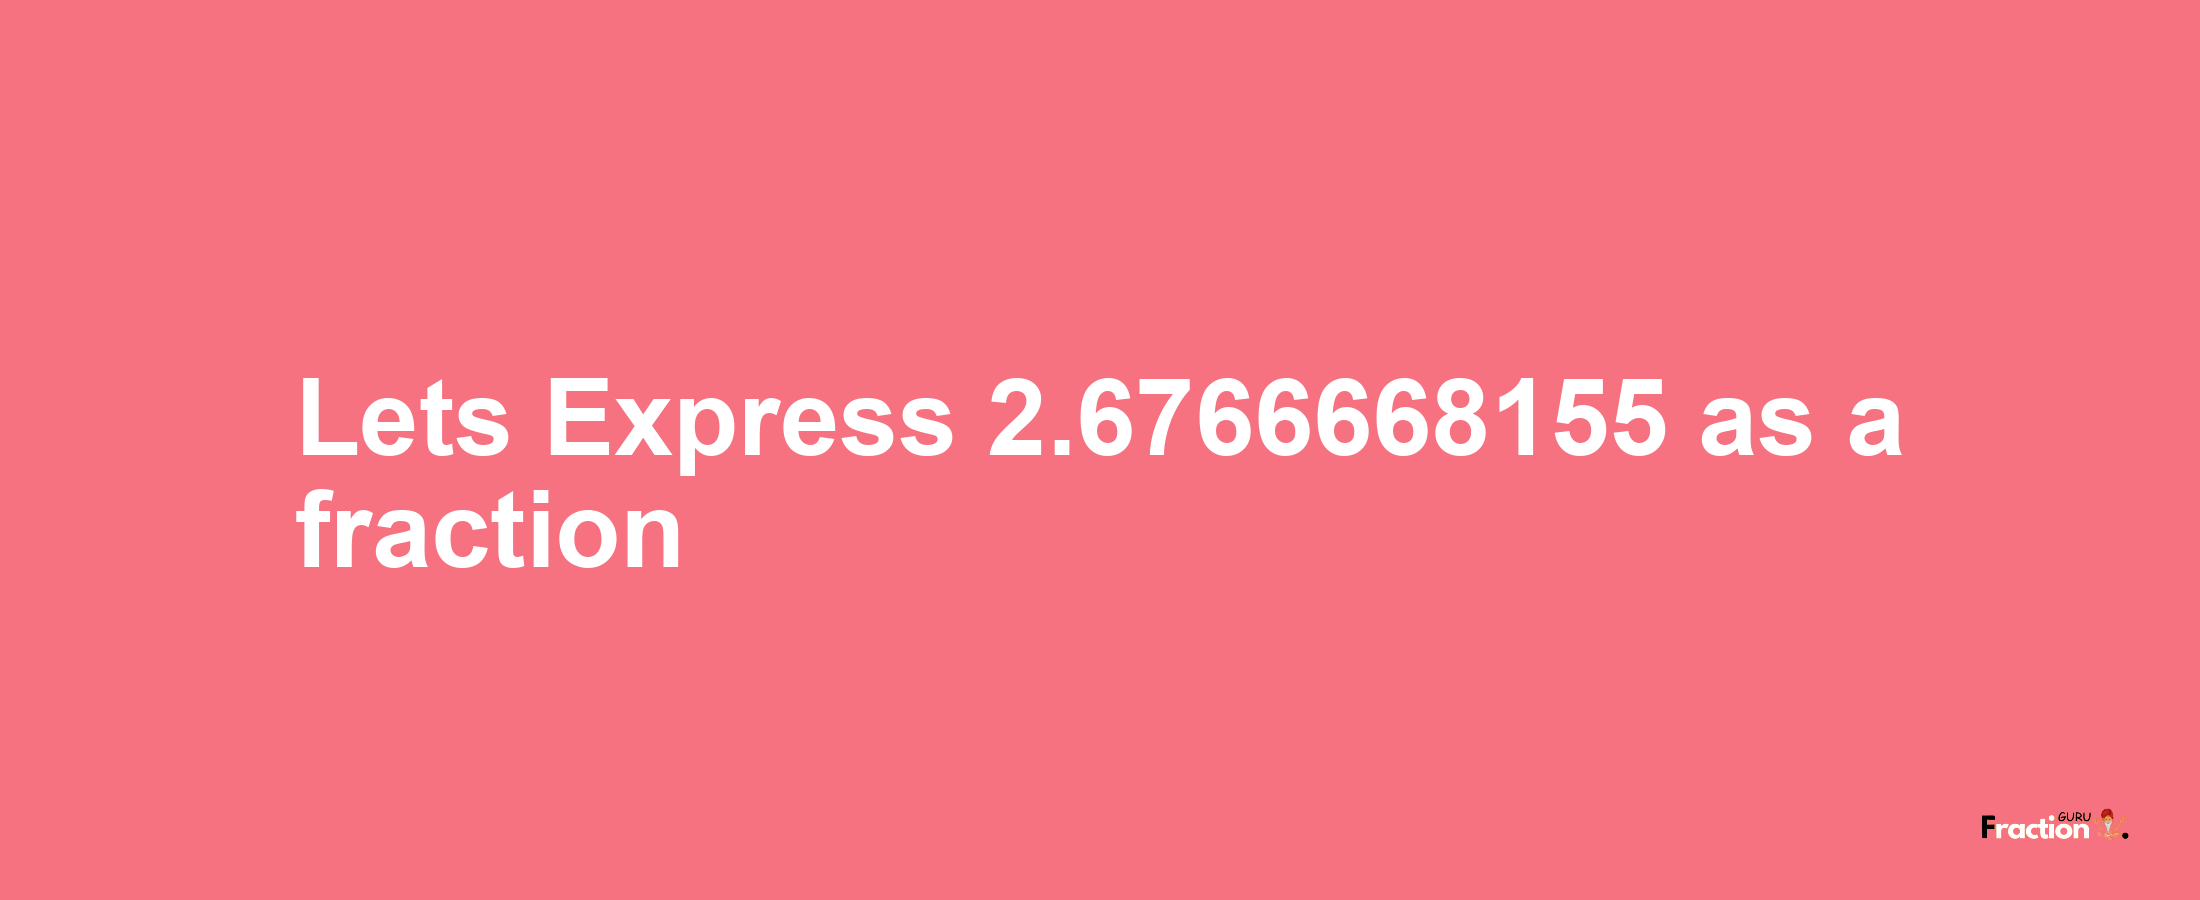 Lets Express 2.6766668155 as afraction